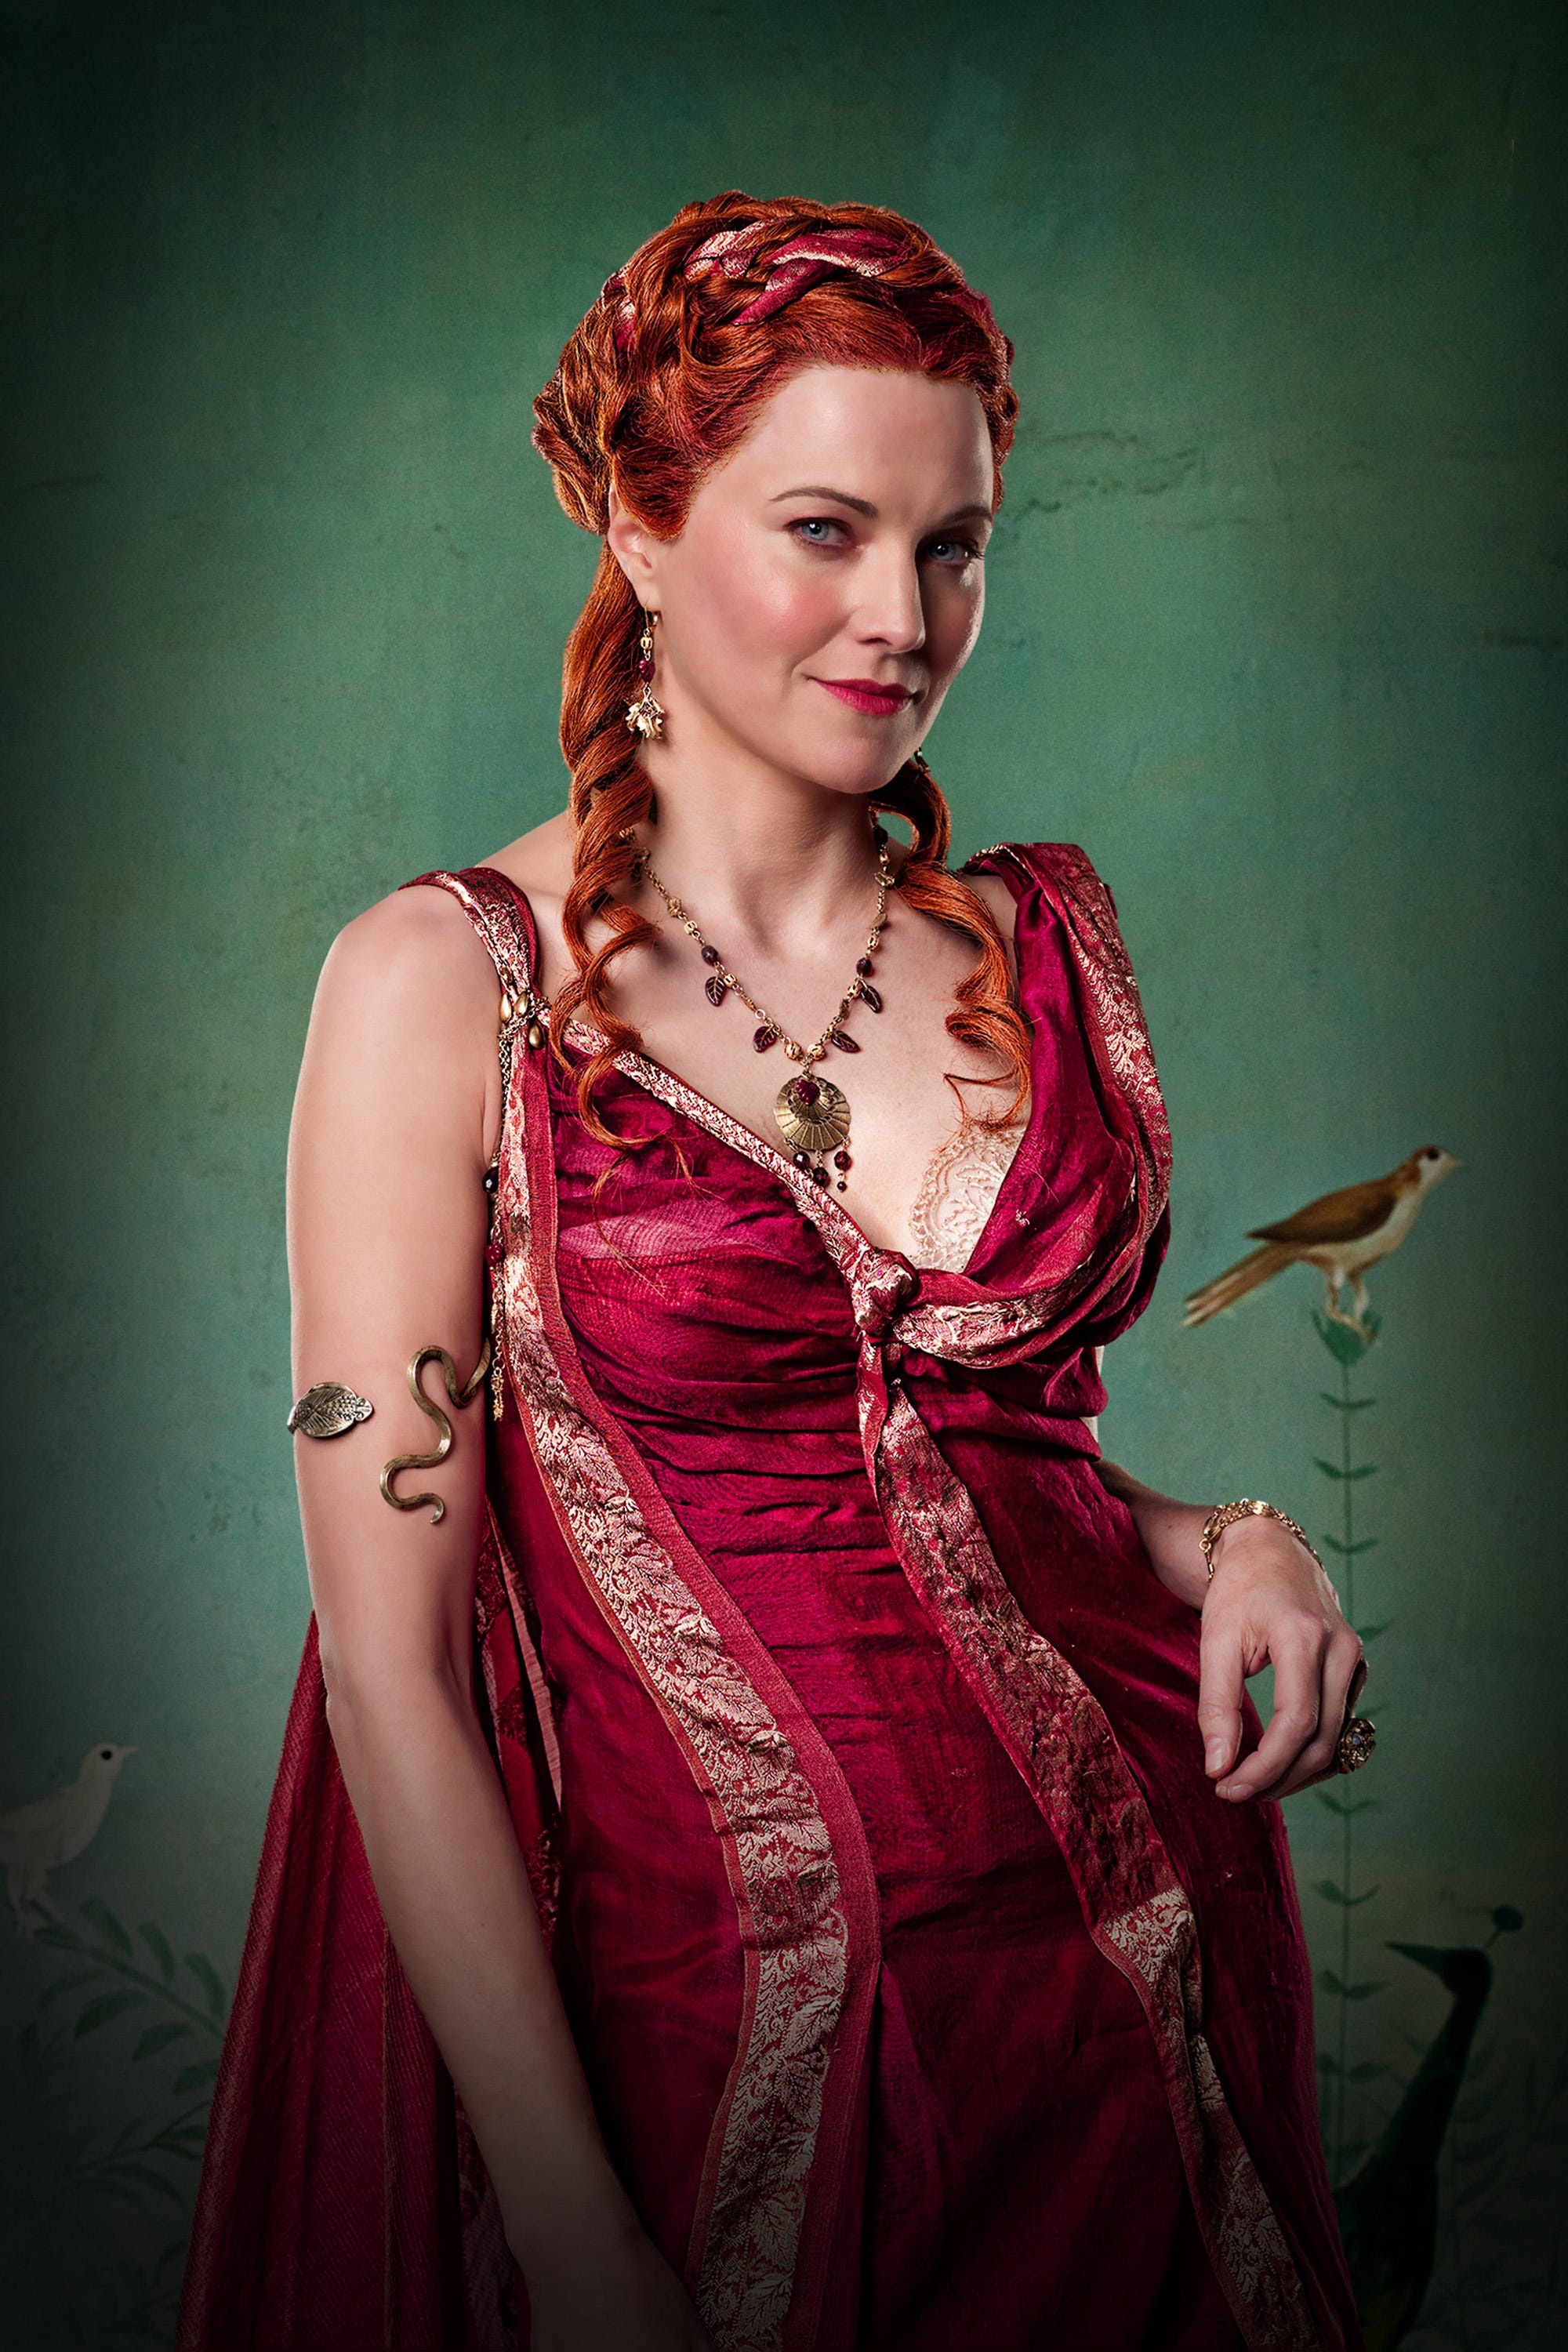 Lucy Lawless: Spartacus, The fiction series, 2010–2013, Lucretia, Batiatus' wife. 2000x3000 HD Wallpaper.